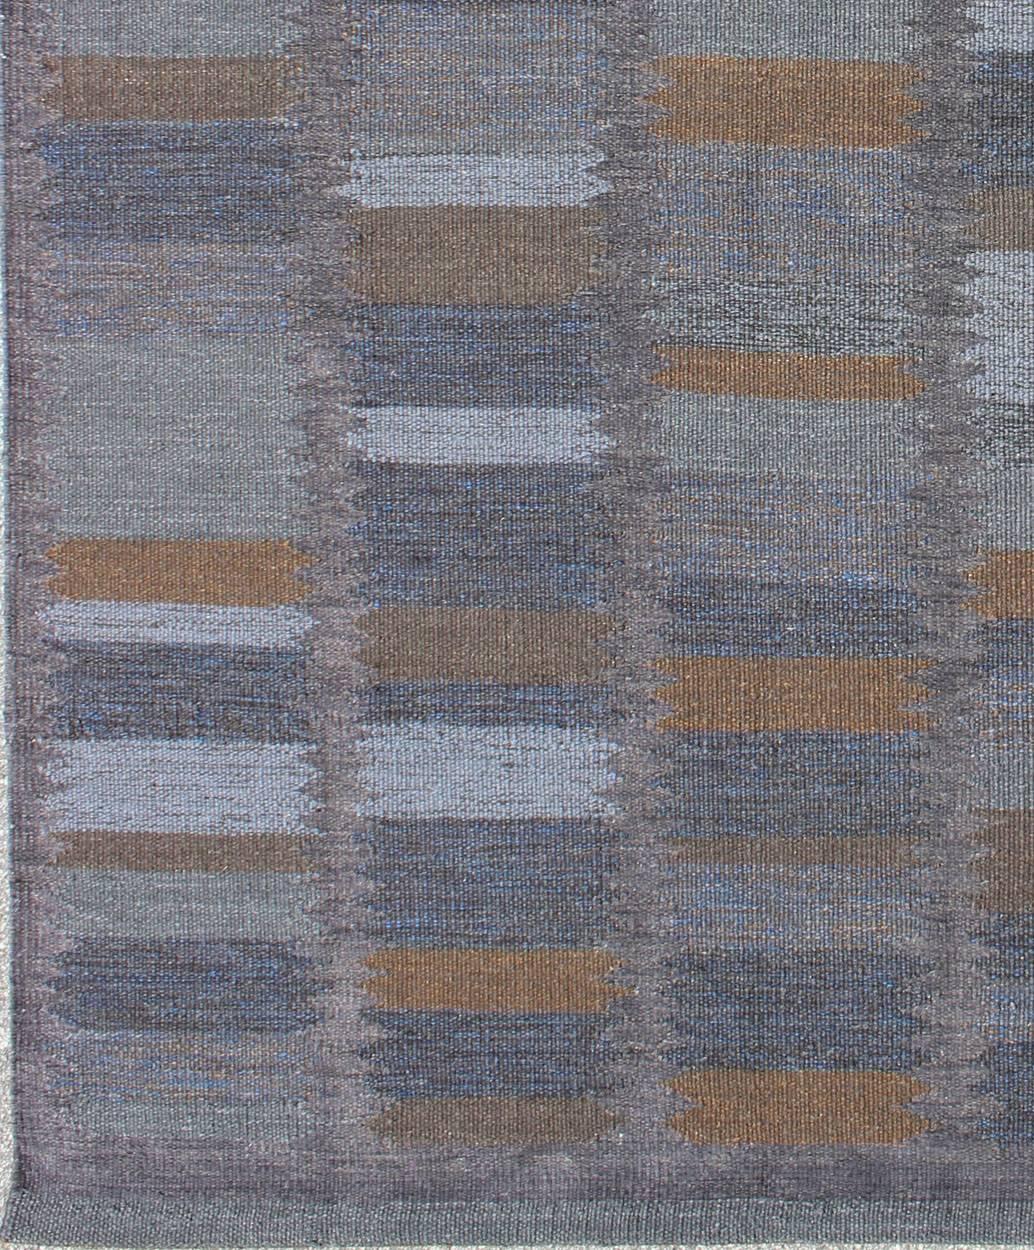 This Scandinavian Flat-Weave patterned rug is inspired by the work of Swedish textile designers of the early to mid-20th Century. With a unique blend of historical and modern design, this dynamic and exciting composition is beautifully suited for